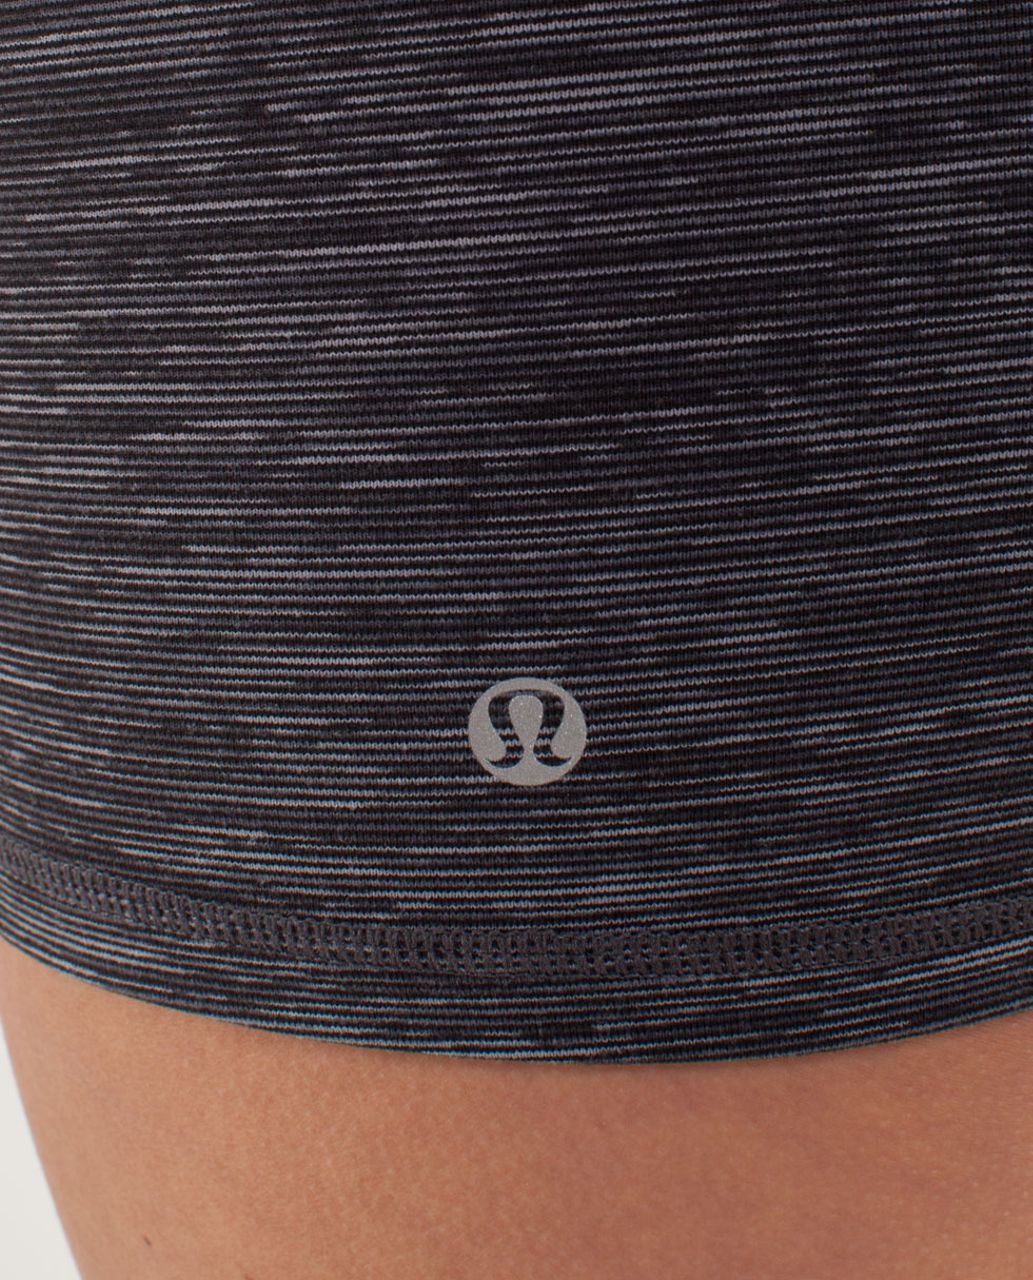 Lululemon Boogie Short - Wee Are From Space Black Combo